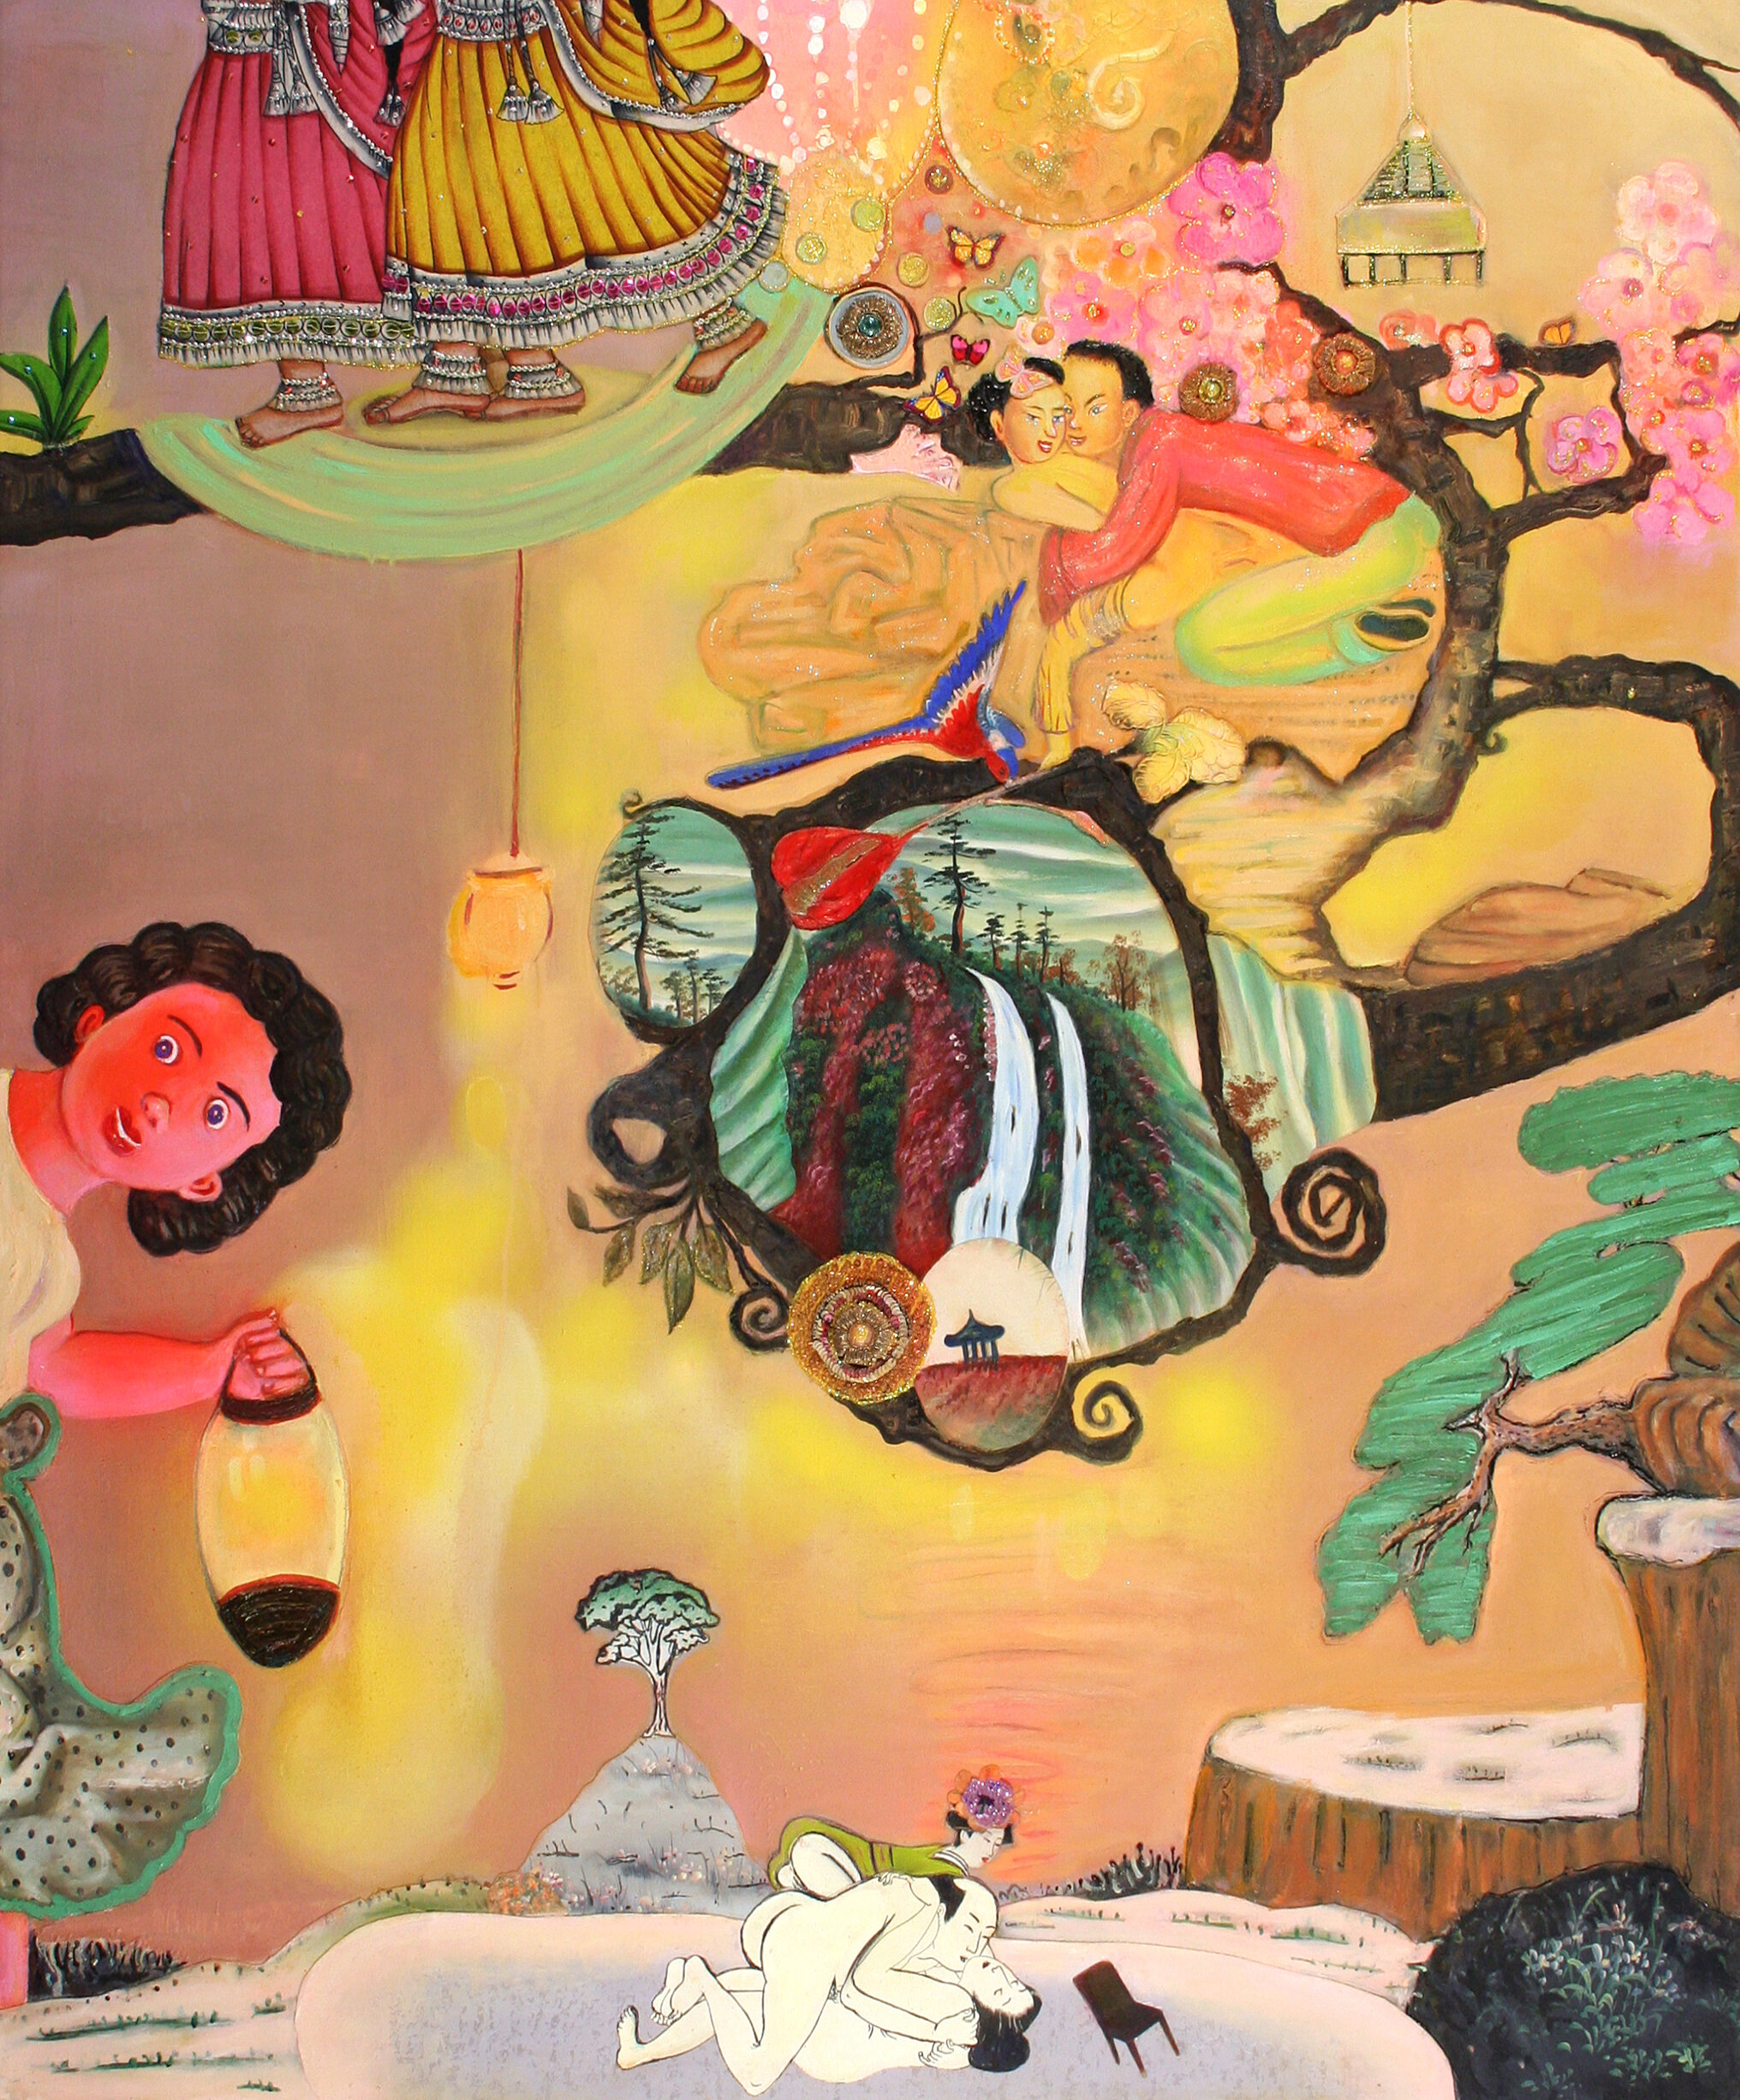 As Seen in the Night, 60" × 50", mixed media and collage on canvas, 2005